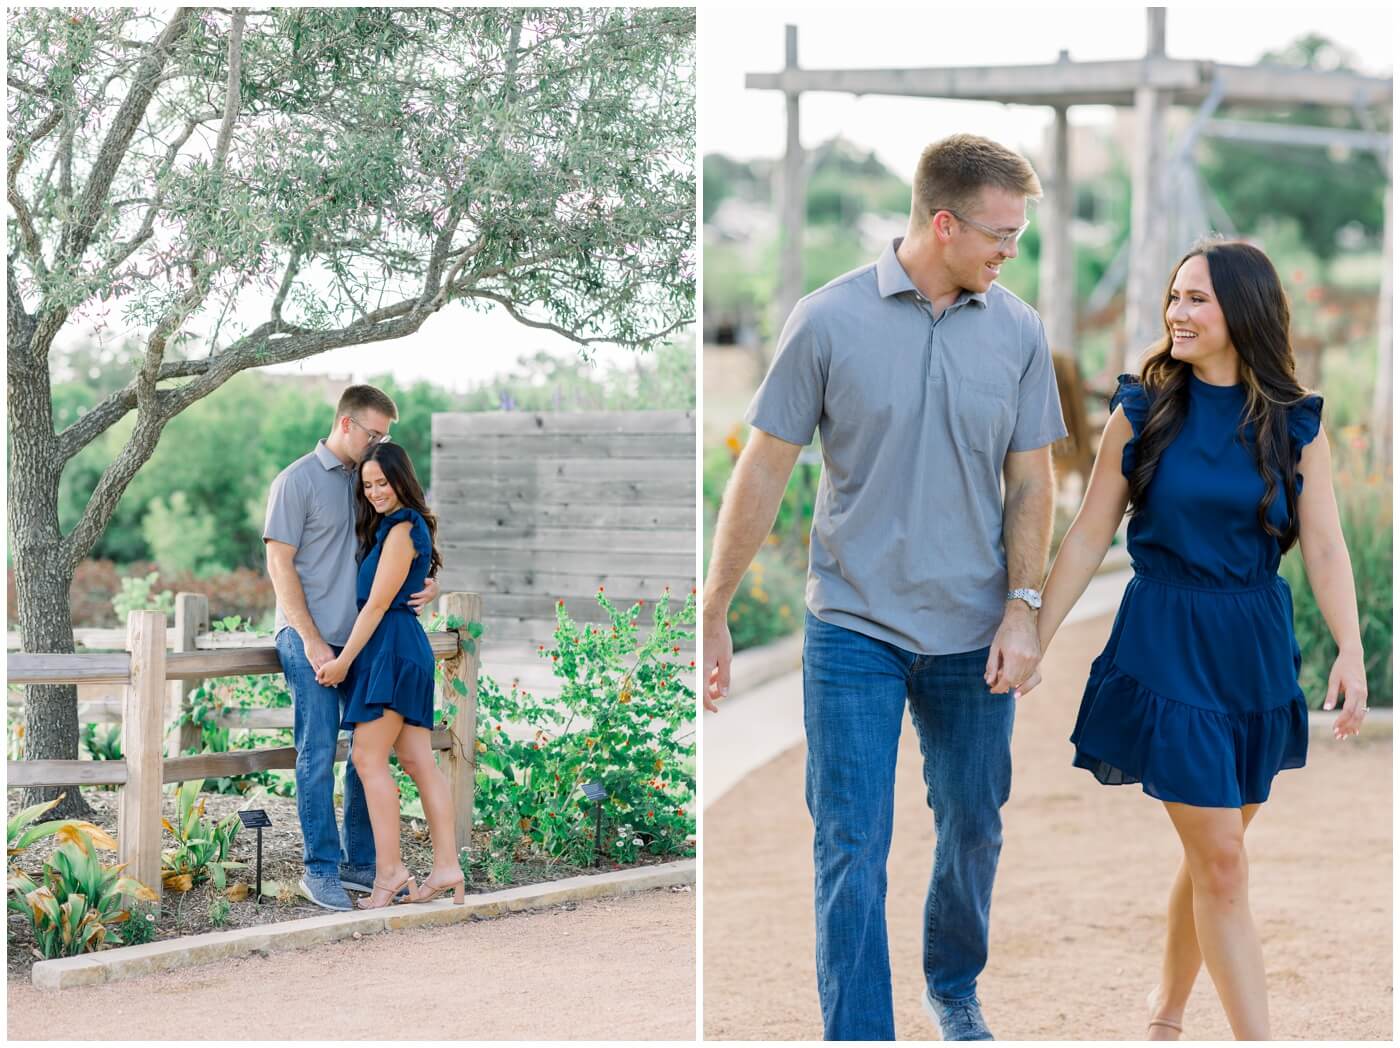 Wedding photographer in Texas | A couple smile and walk through the gardens together